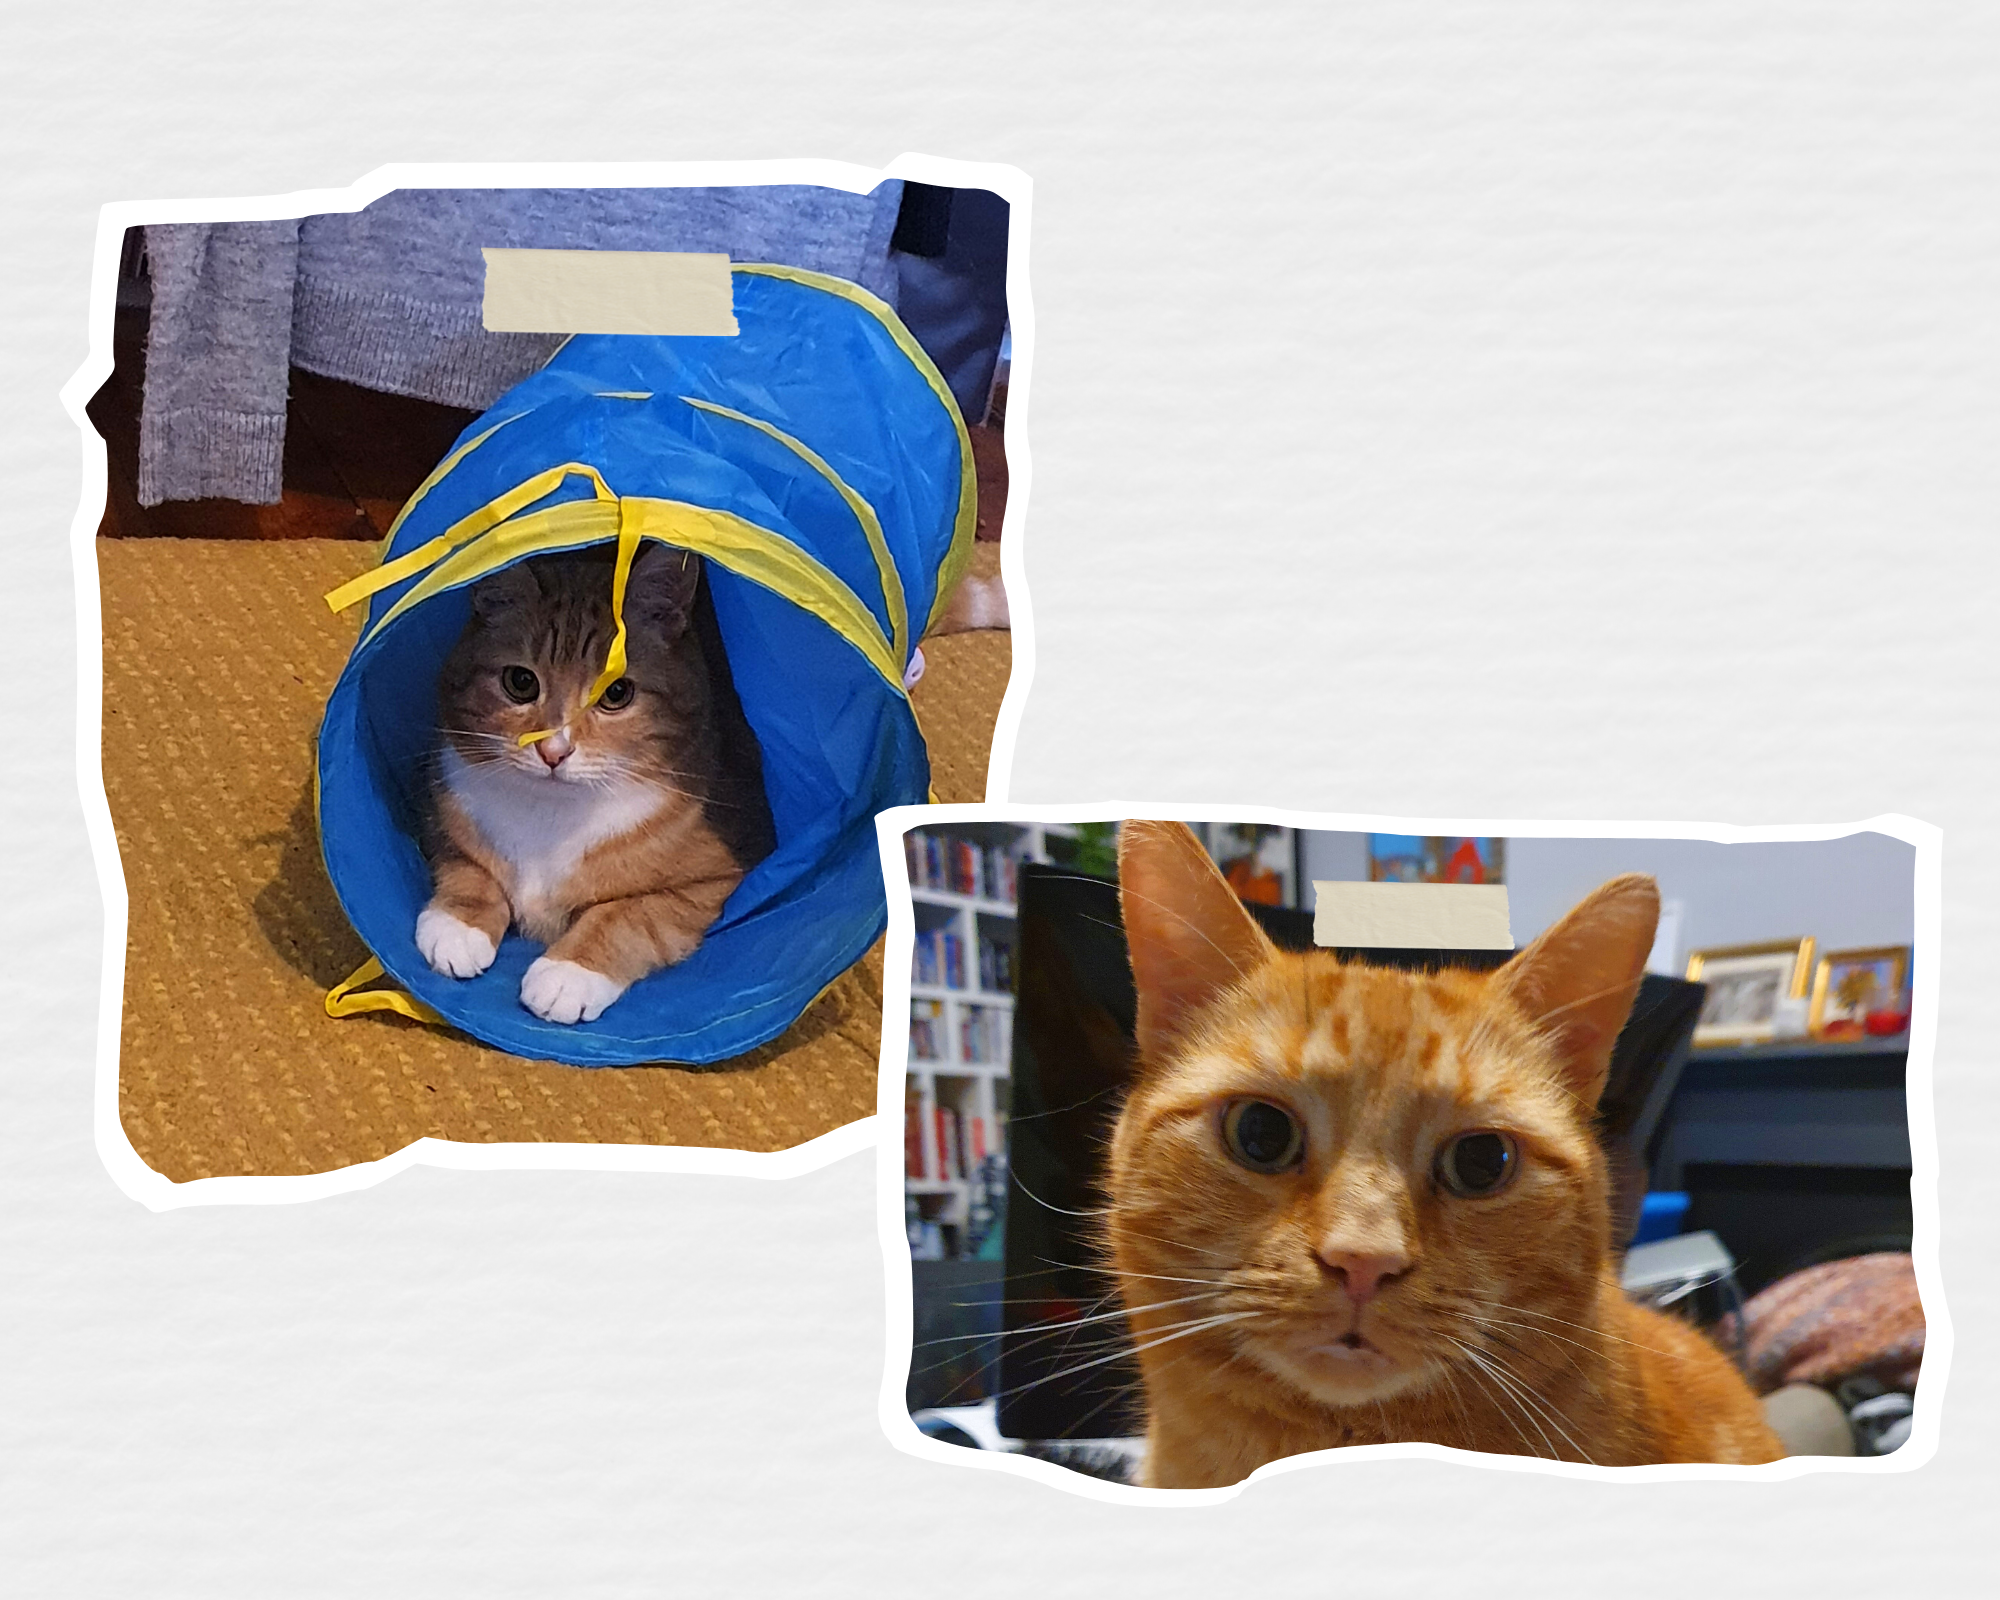 Photos of my ginger cats: Jim, left, is ginger with white paws and a white belly. He's sitting inside his little play tunnel. Ralph, who's all ginger, is pictured staring into the camera.